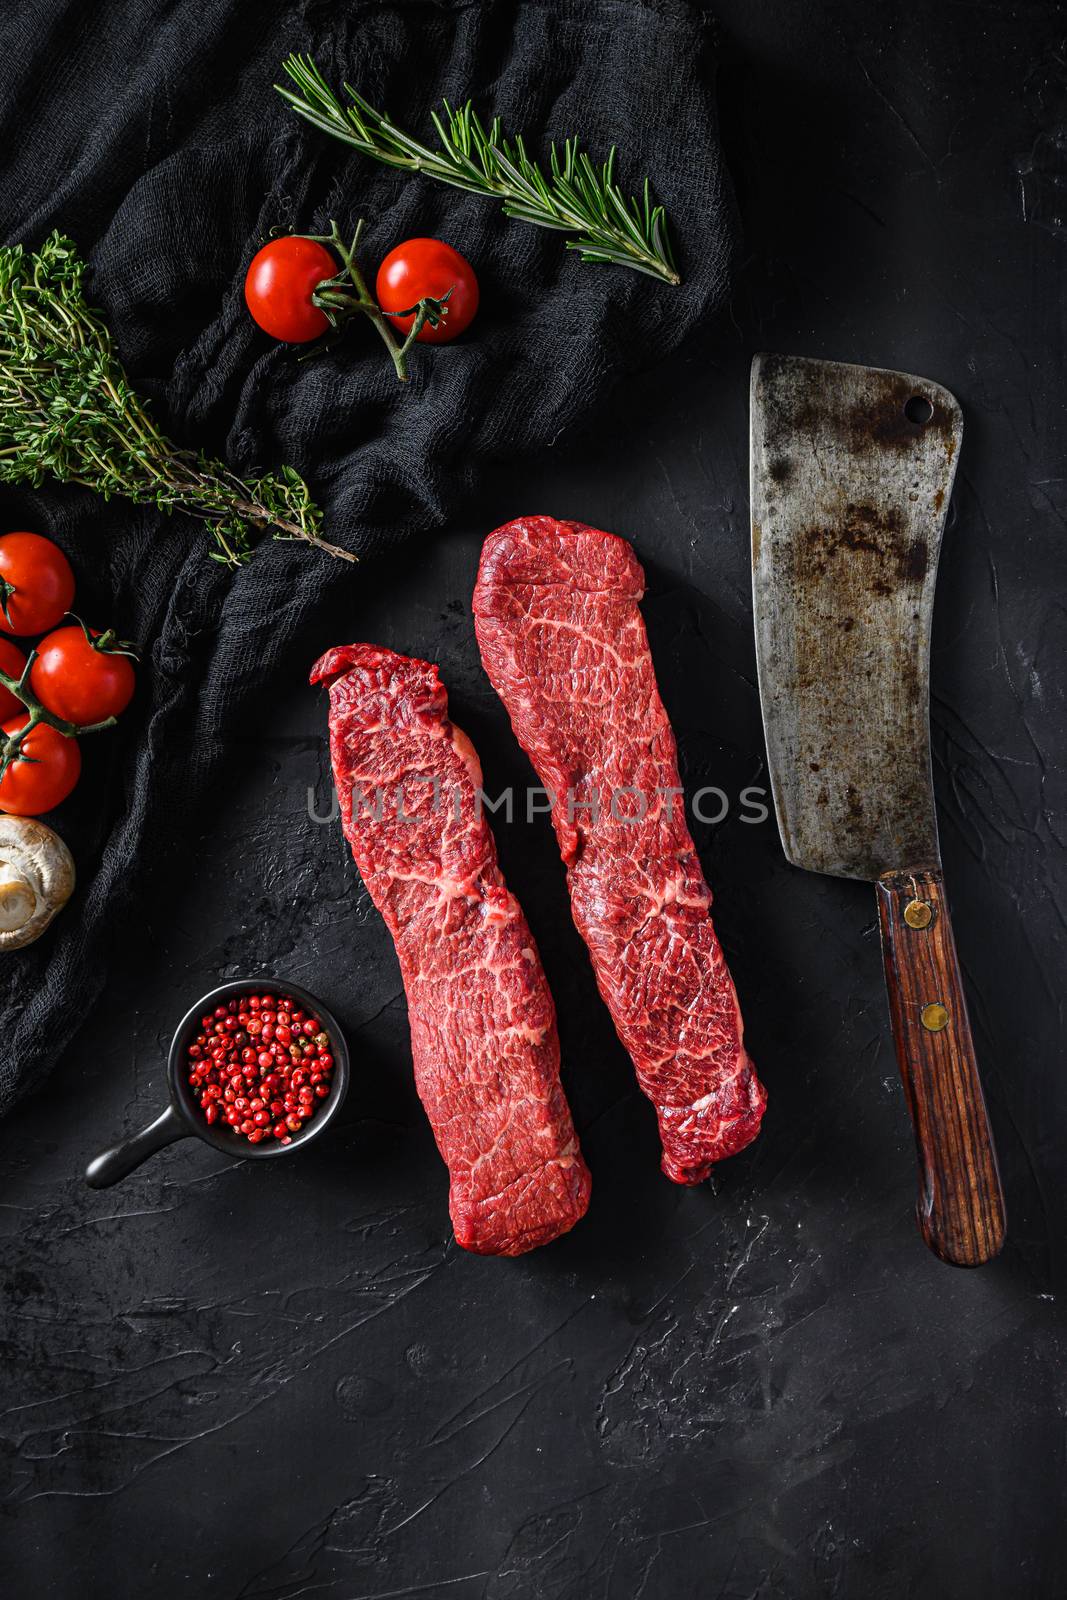 Raw set of denver cut organic meat with vegetable rosemary and other ingredients near butcher meat clever knife for bbq or grill over black stone background top view vertical by Ilianesolenyi